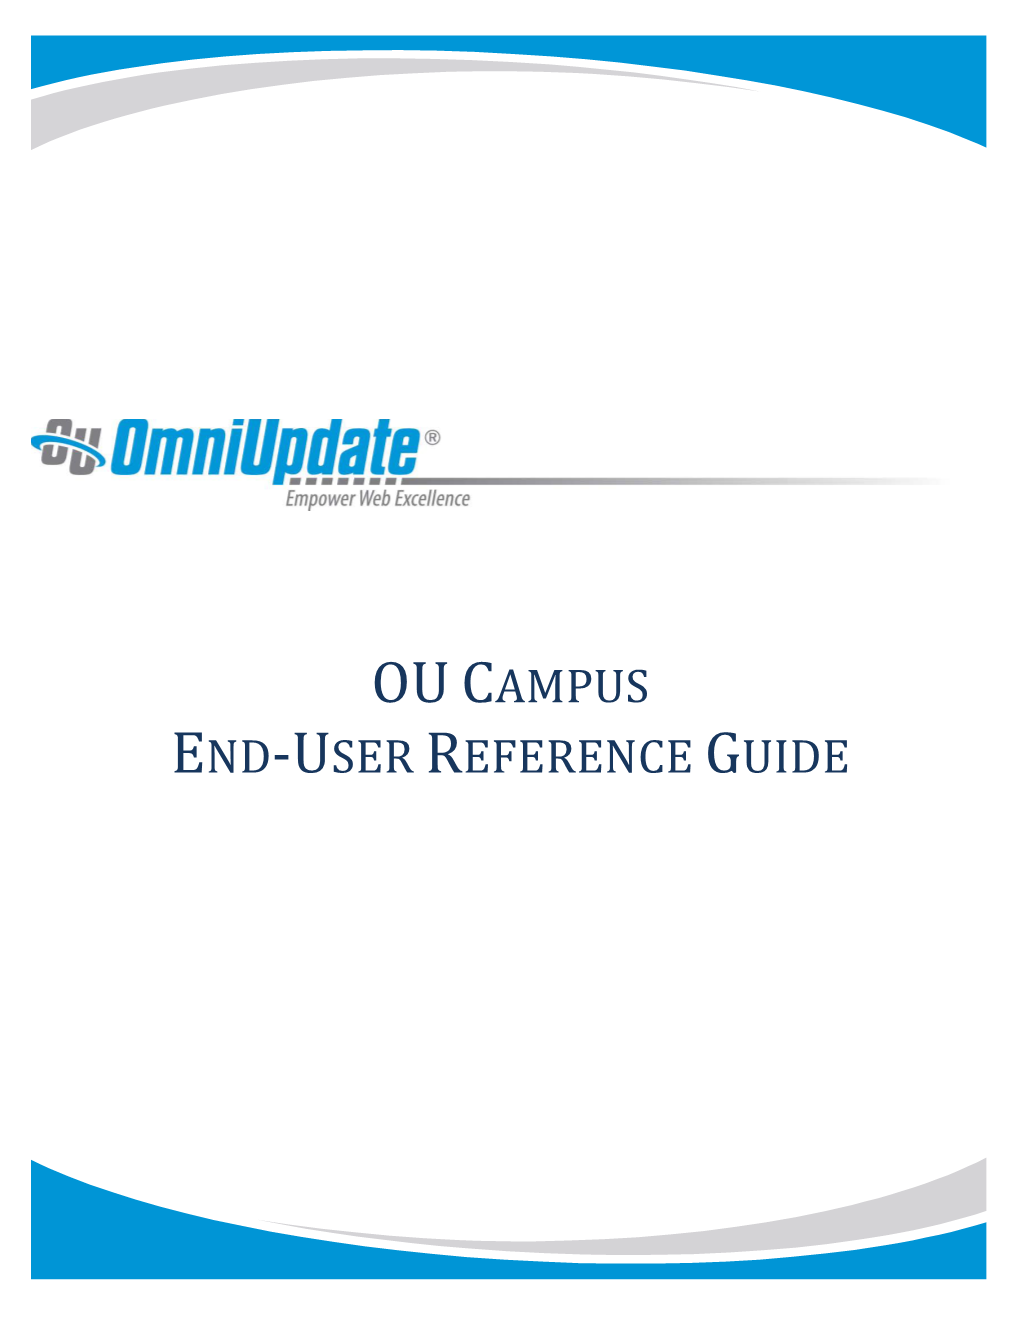 Oucampus End-User Reference Guide